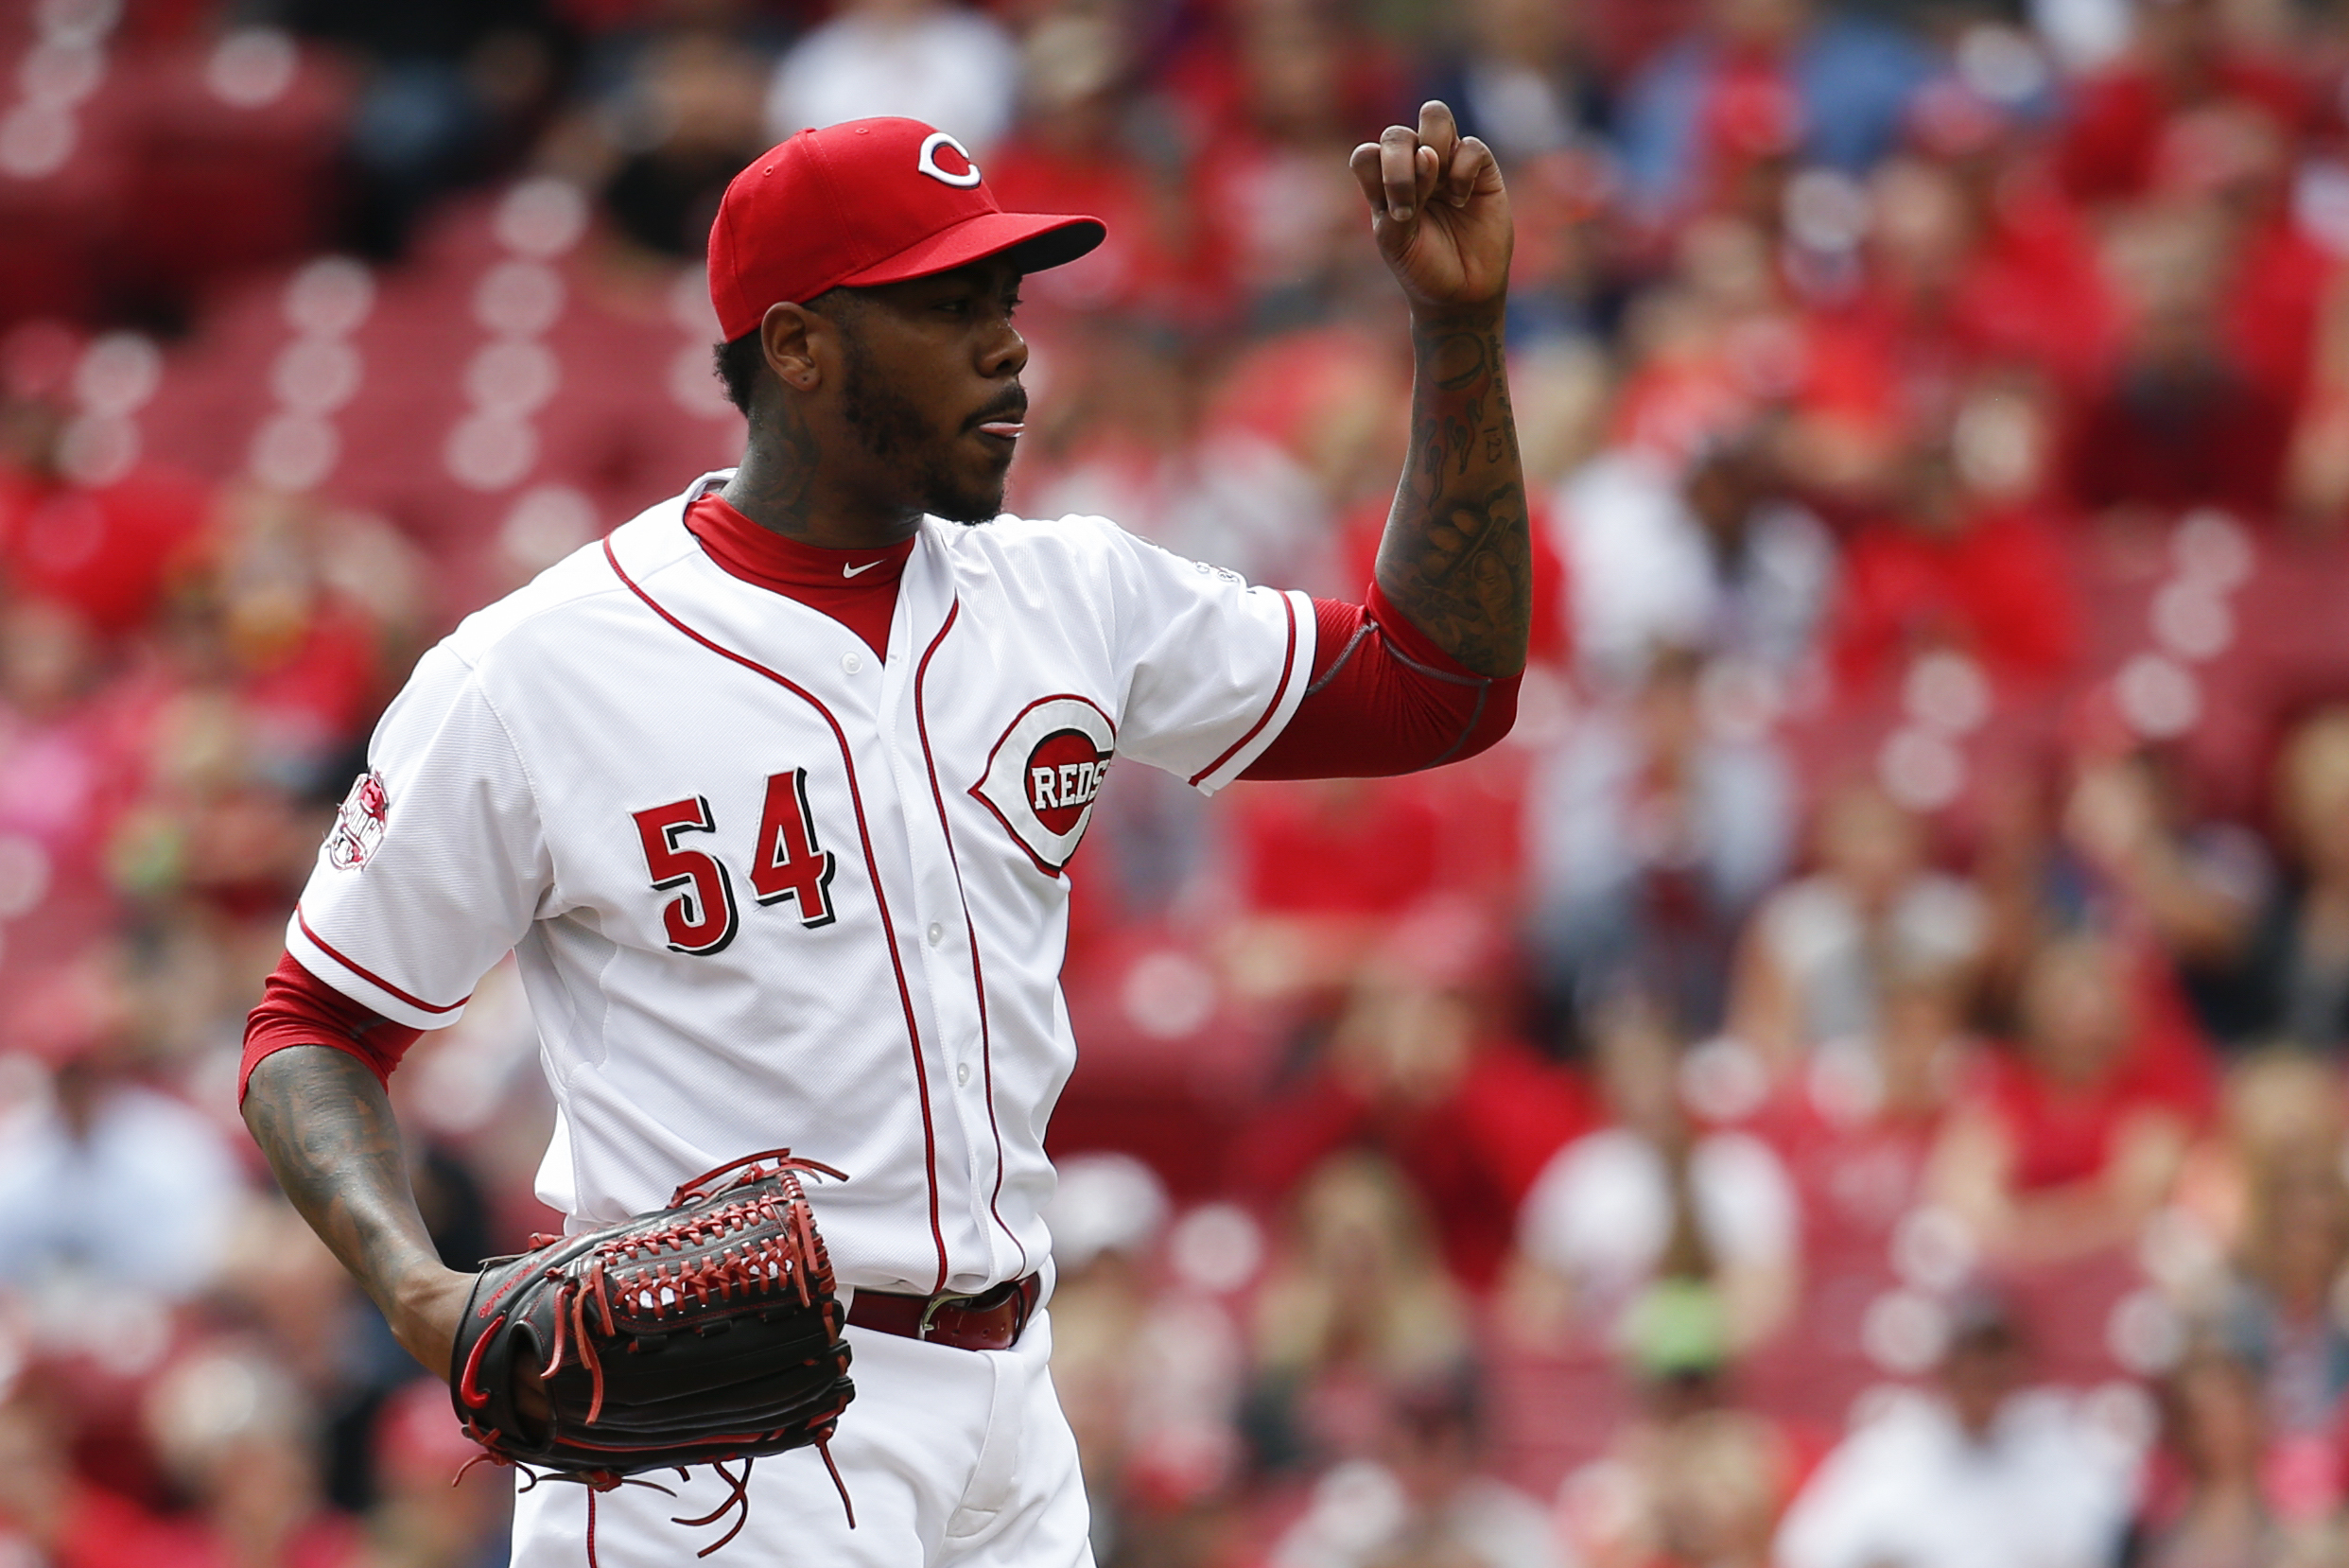 Report: Nationals have talked to the Reds about Aroldis Chapman